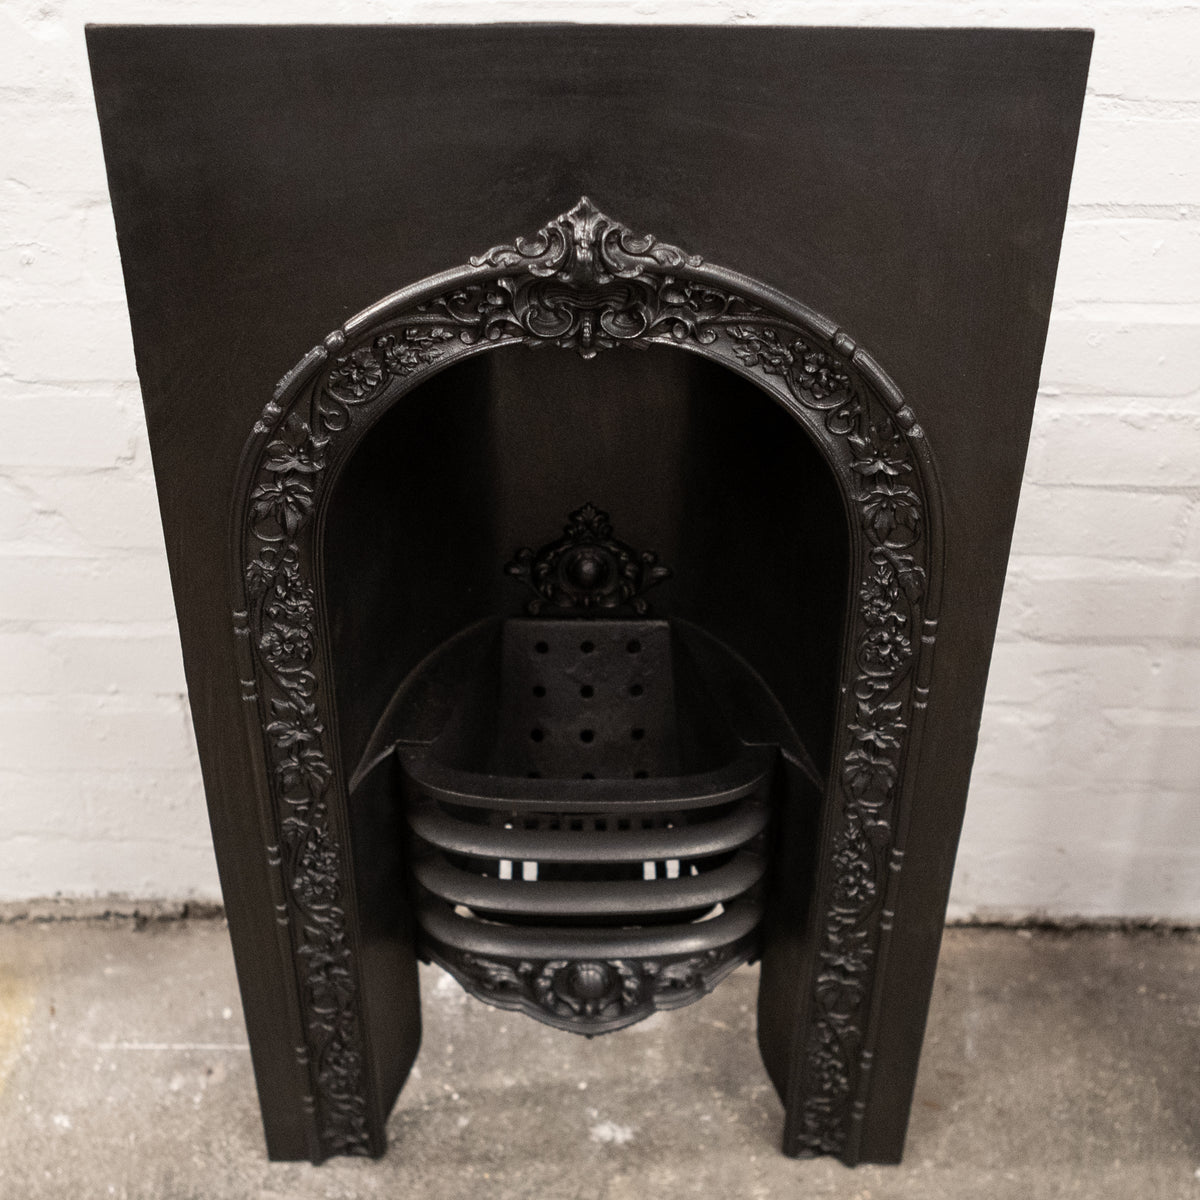 Antique Ornate Victorian Cast Iron Arched Insert | The Architectural Forum